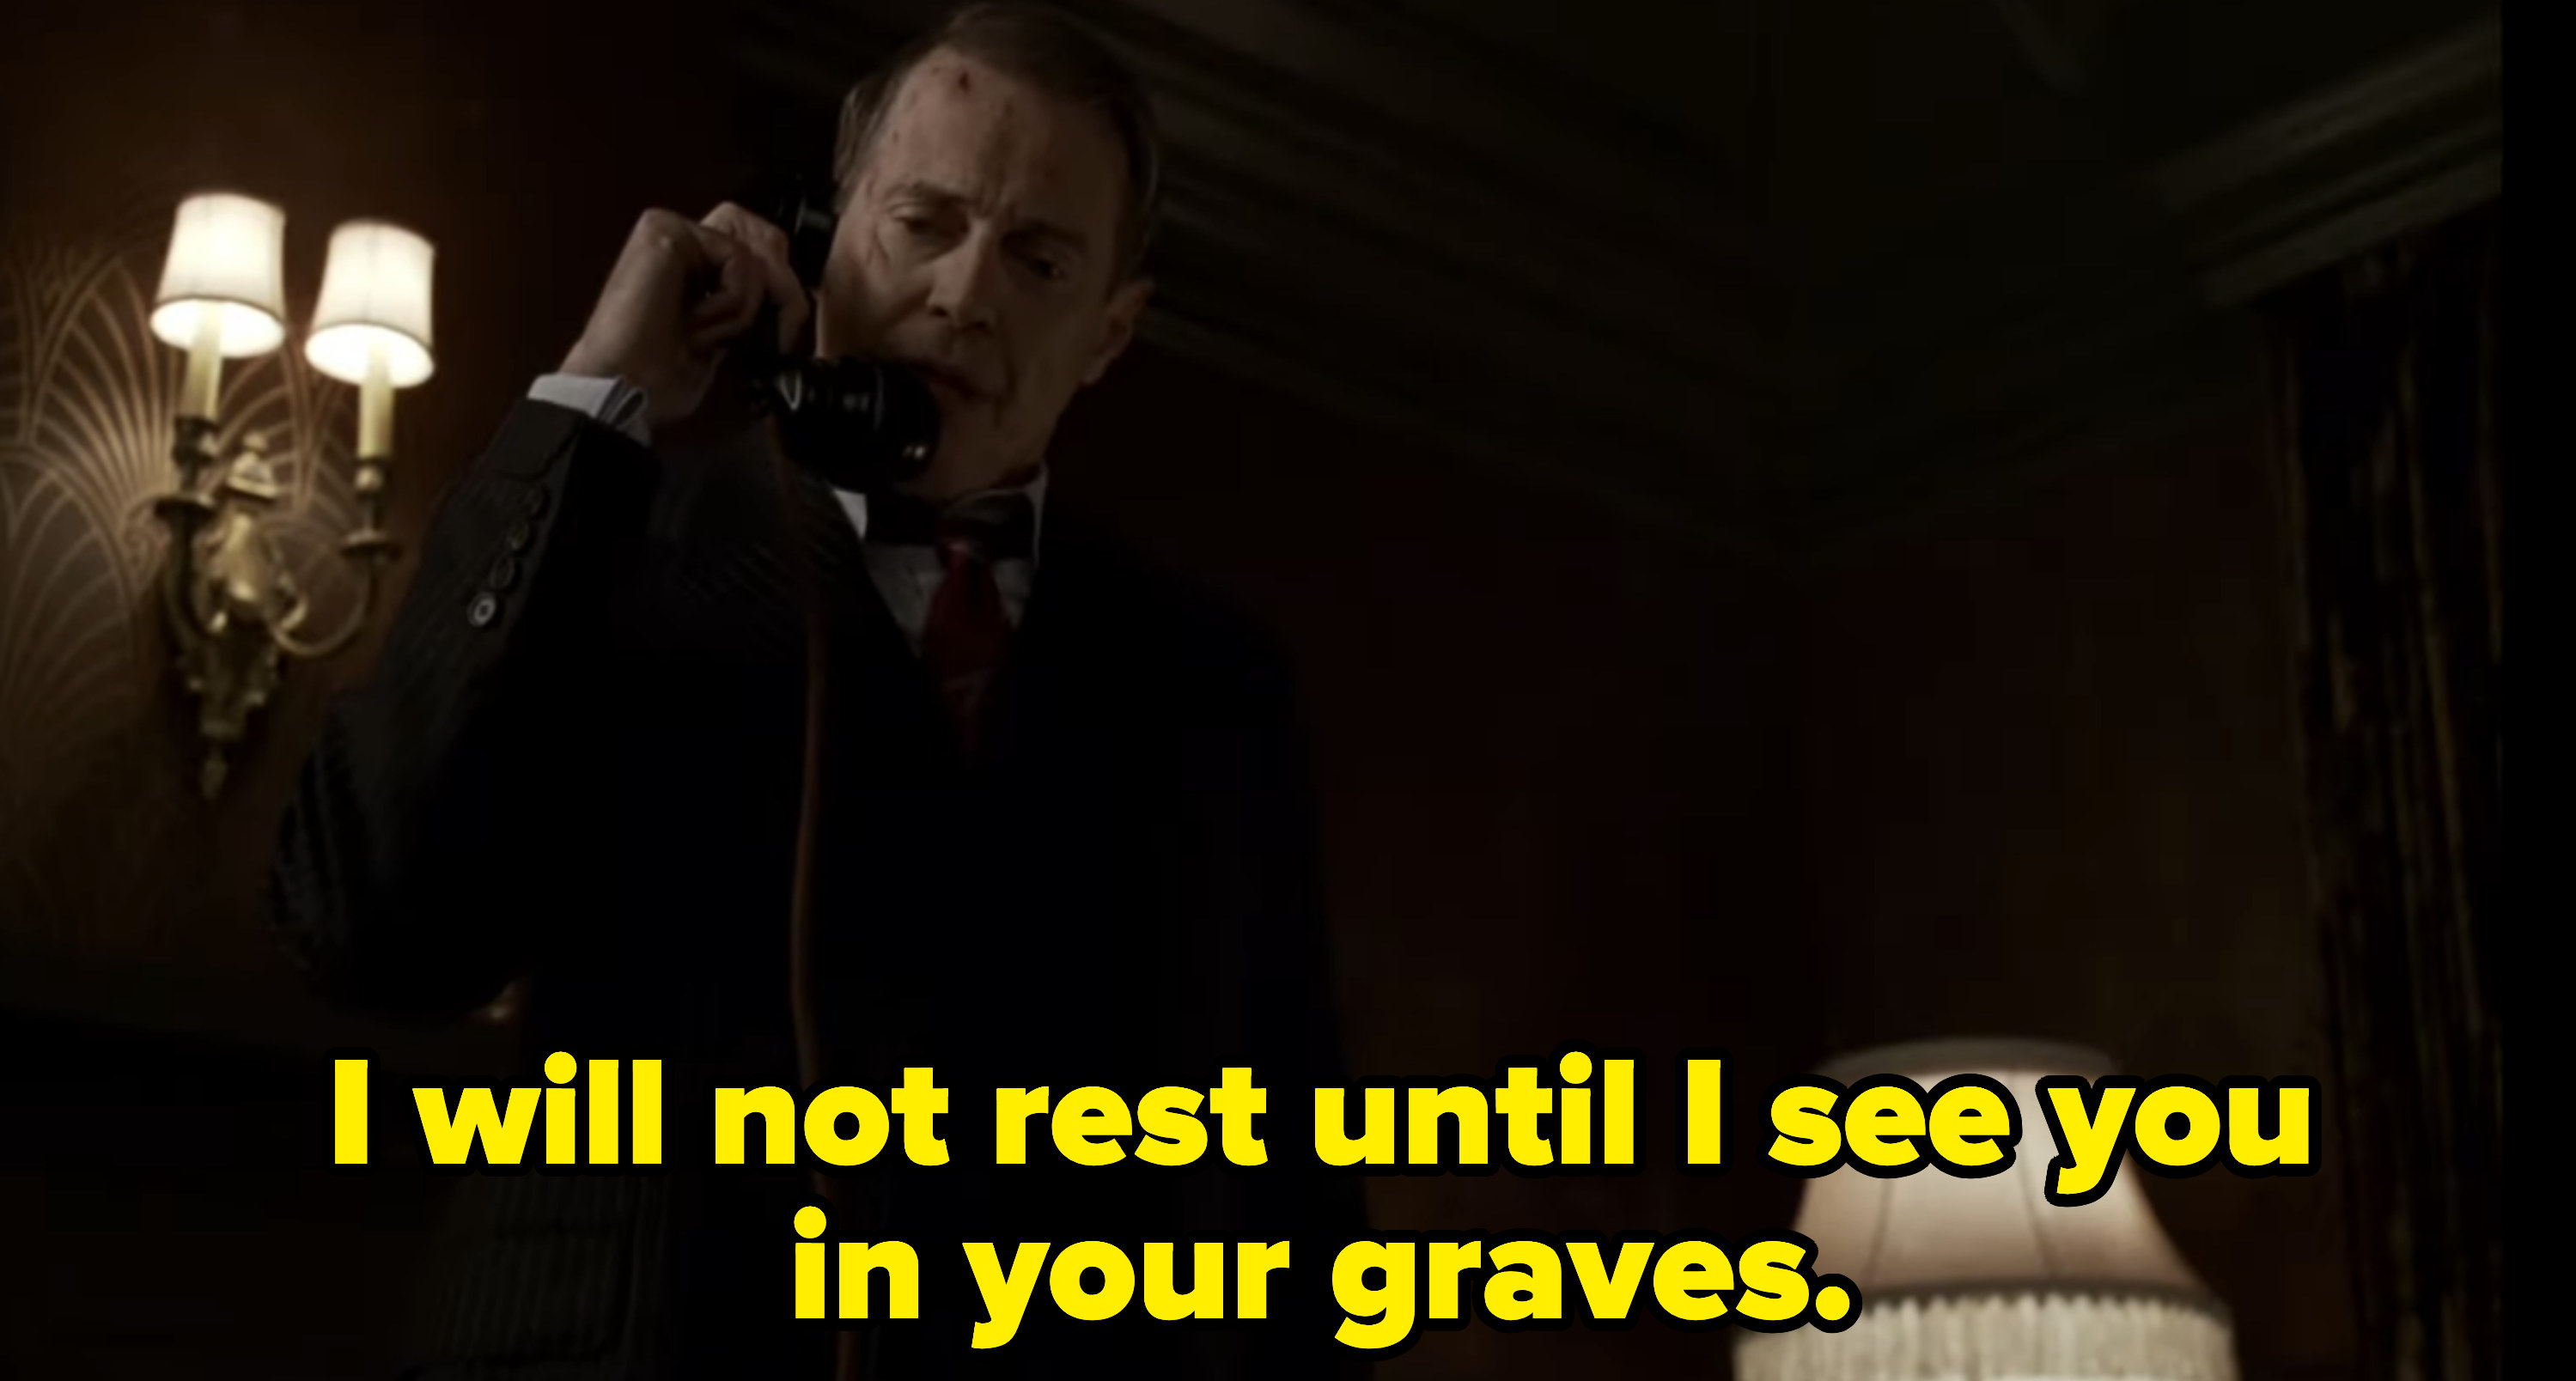 &quot;I will not rest until I see you in your graves.&quot;